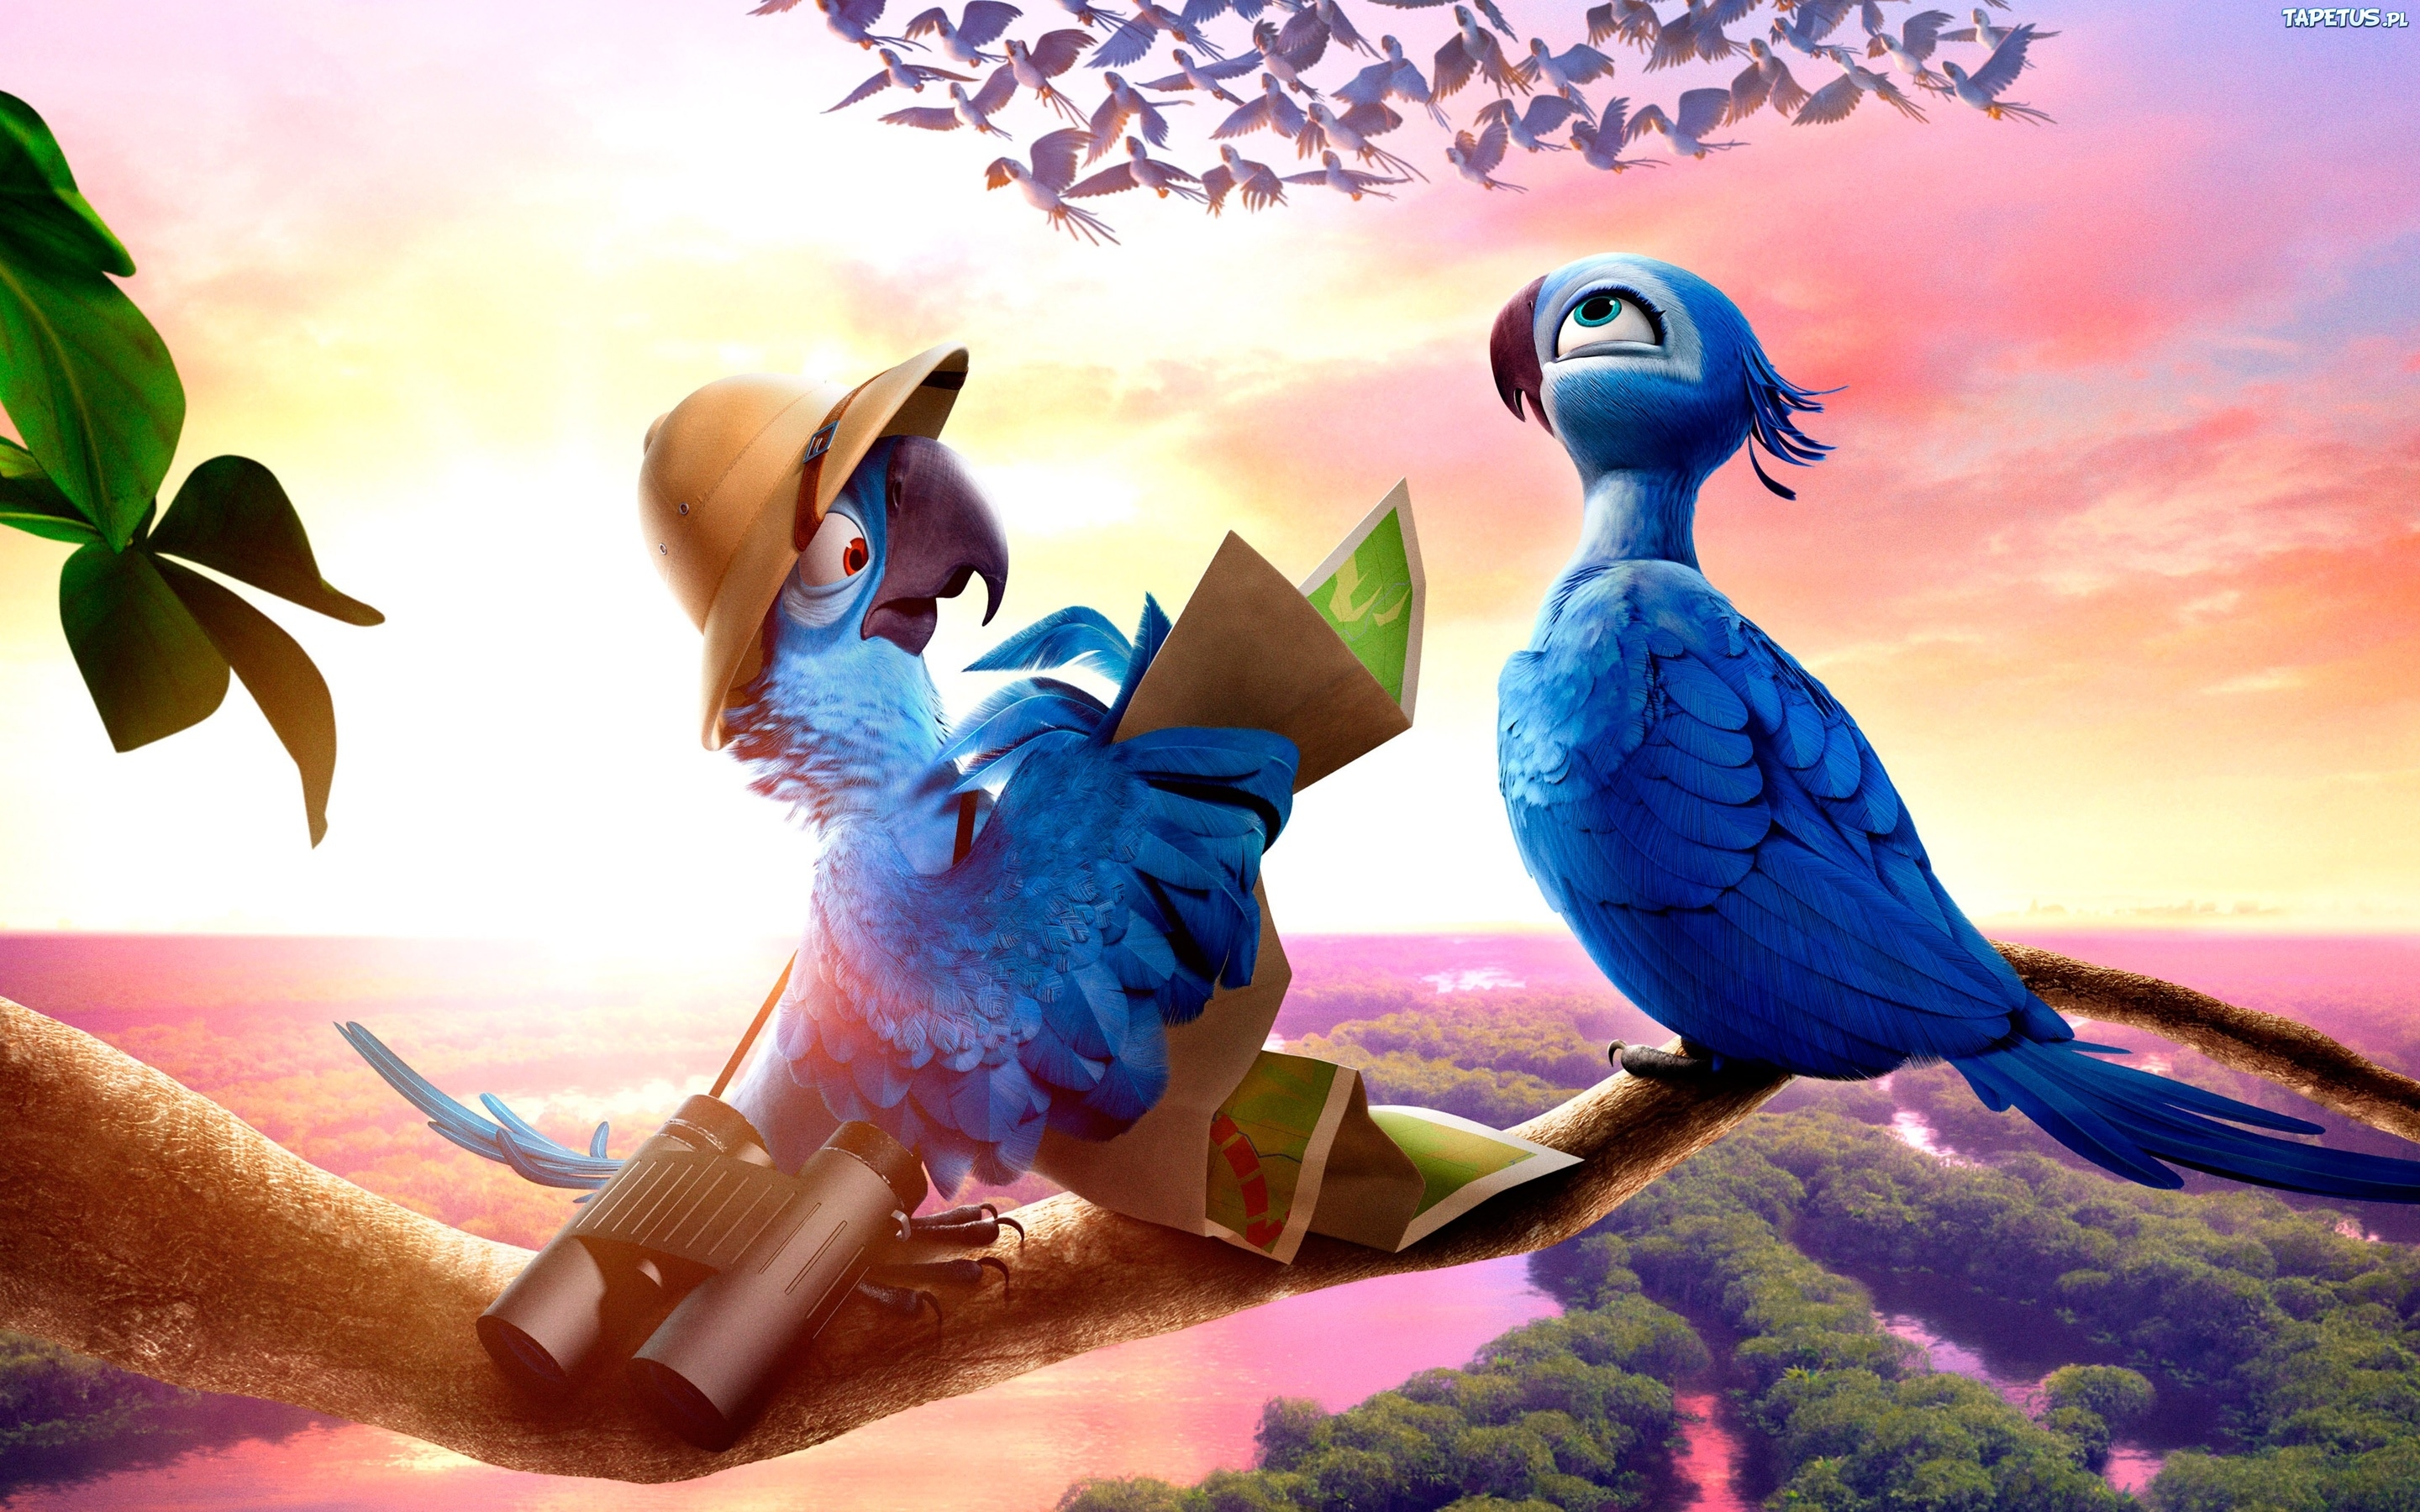 filmy wallpaper,bird,animated cartoon,parrot,animation,pigeons and doves